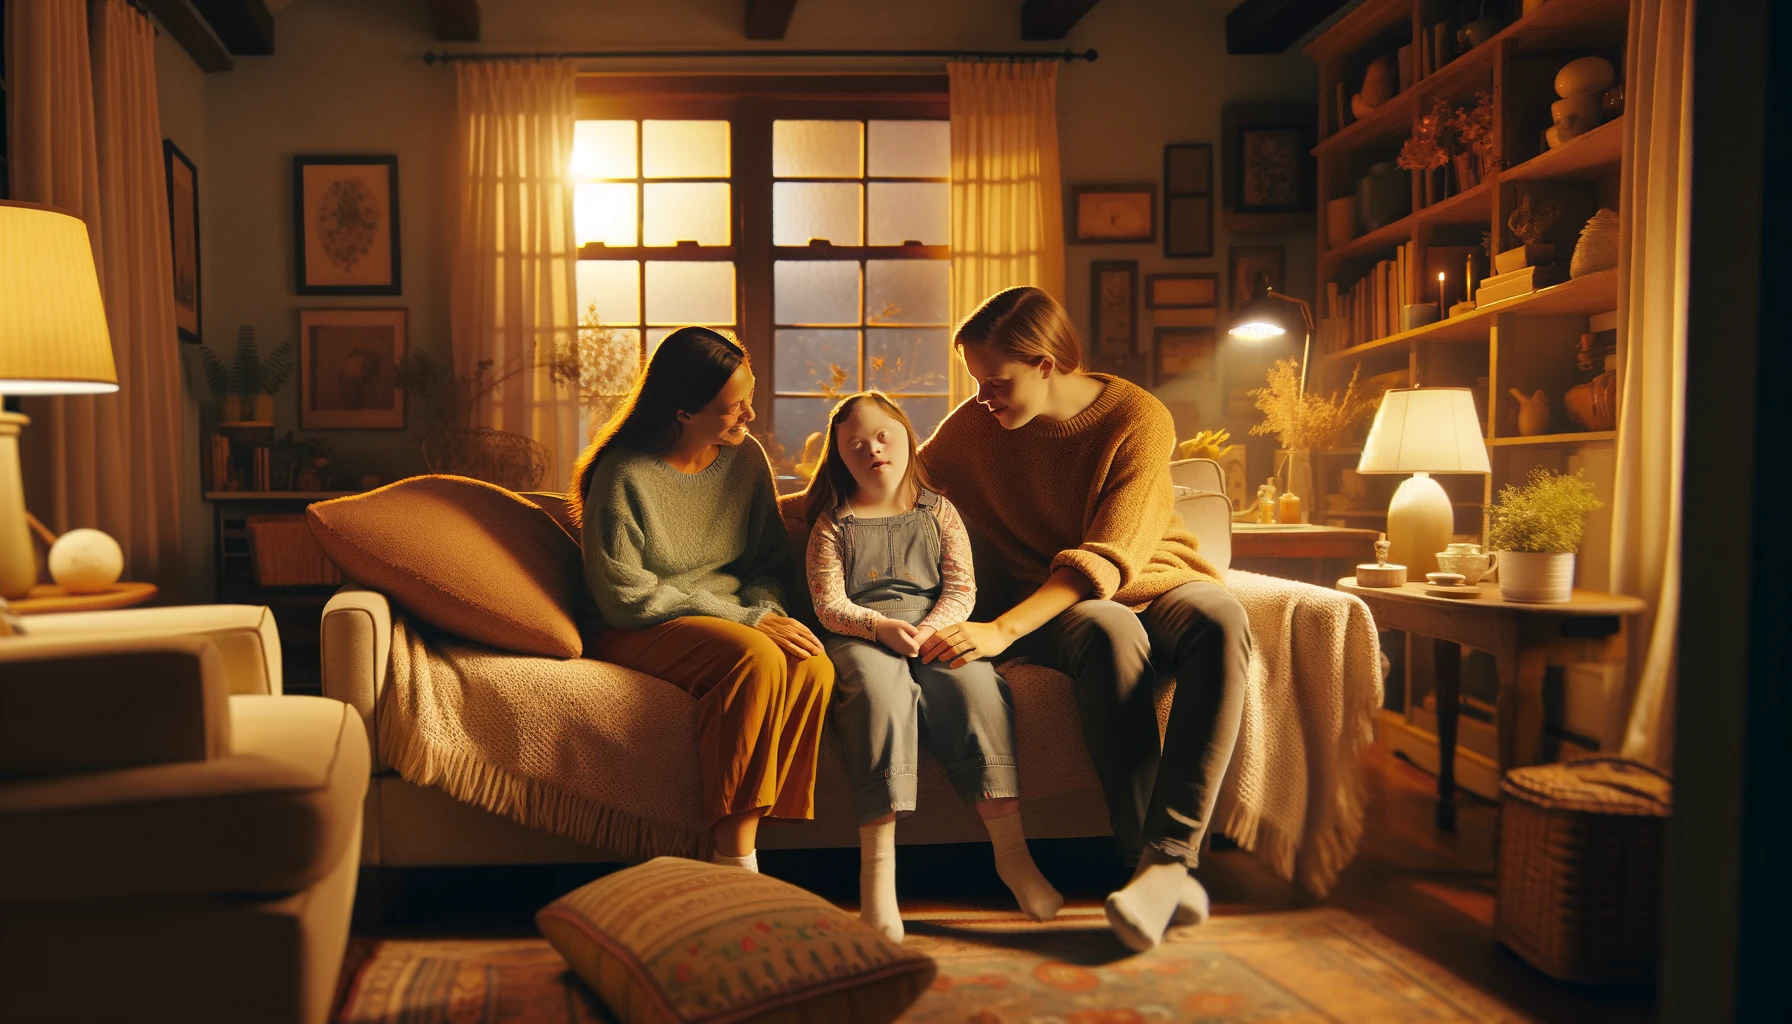 A warmly lit living room scene where a young girl with Down syndrome is seated comfortably on a plush couch, flanked by her caring mother and attentive brother, all engaged in a bonding family moment.